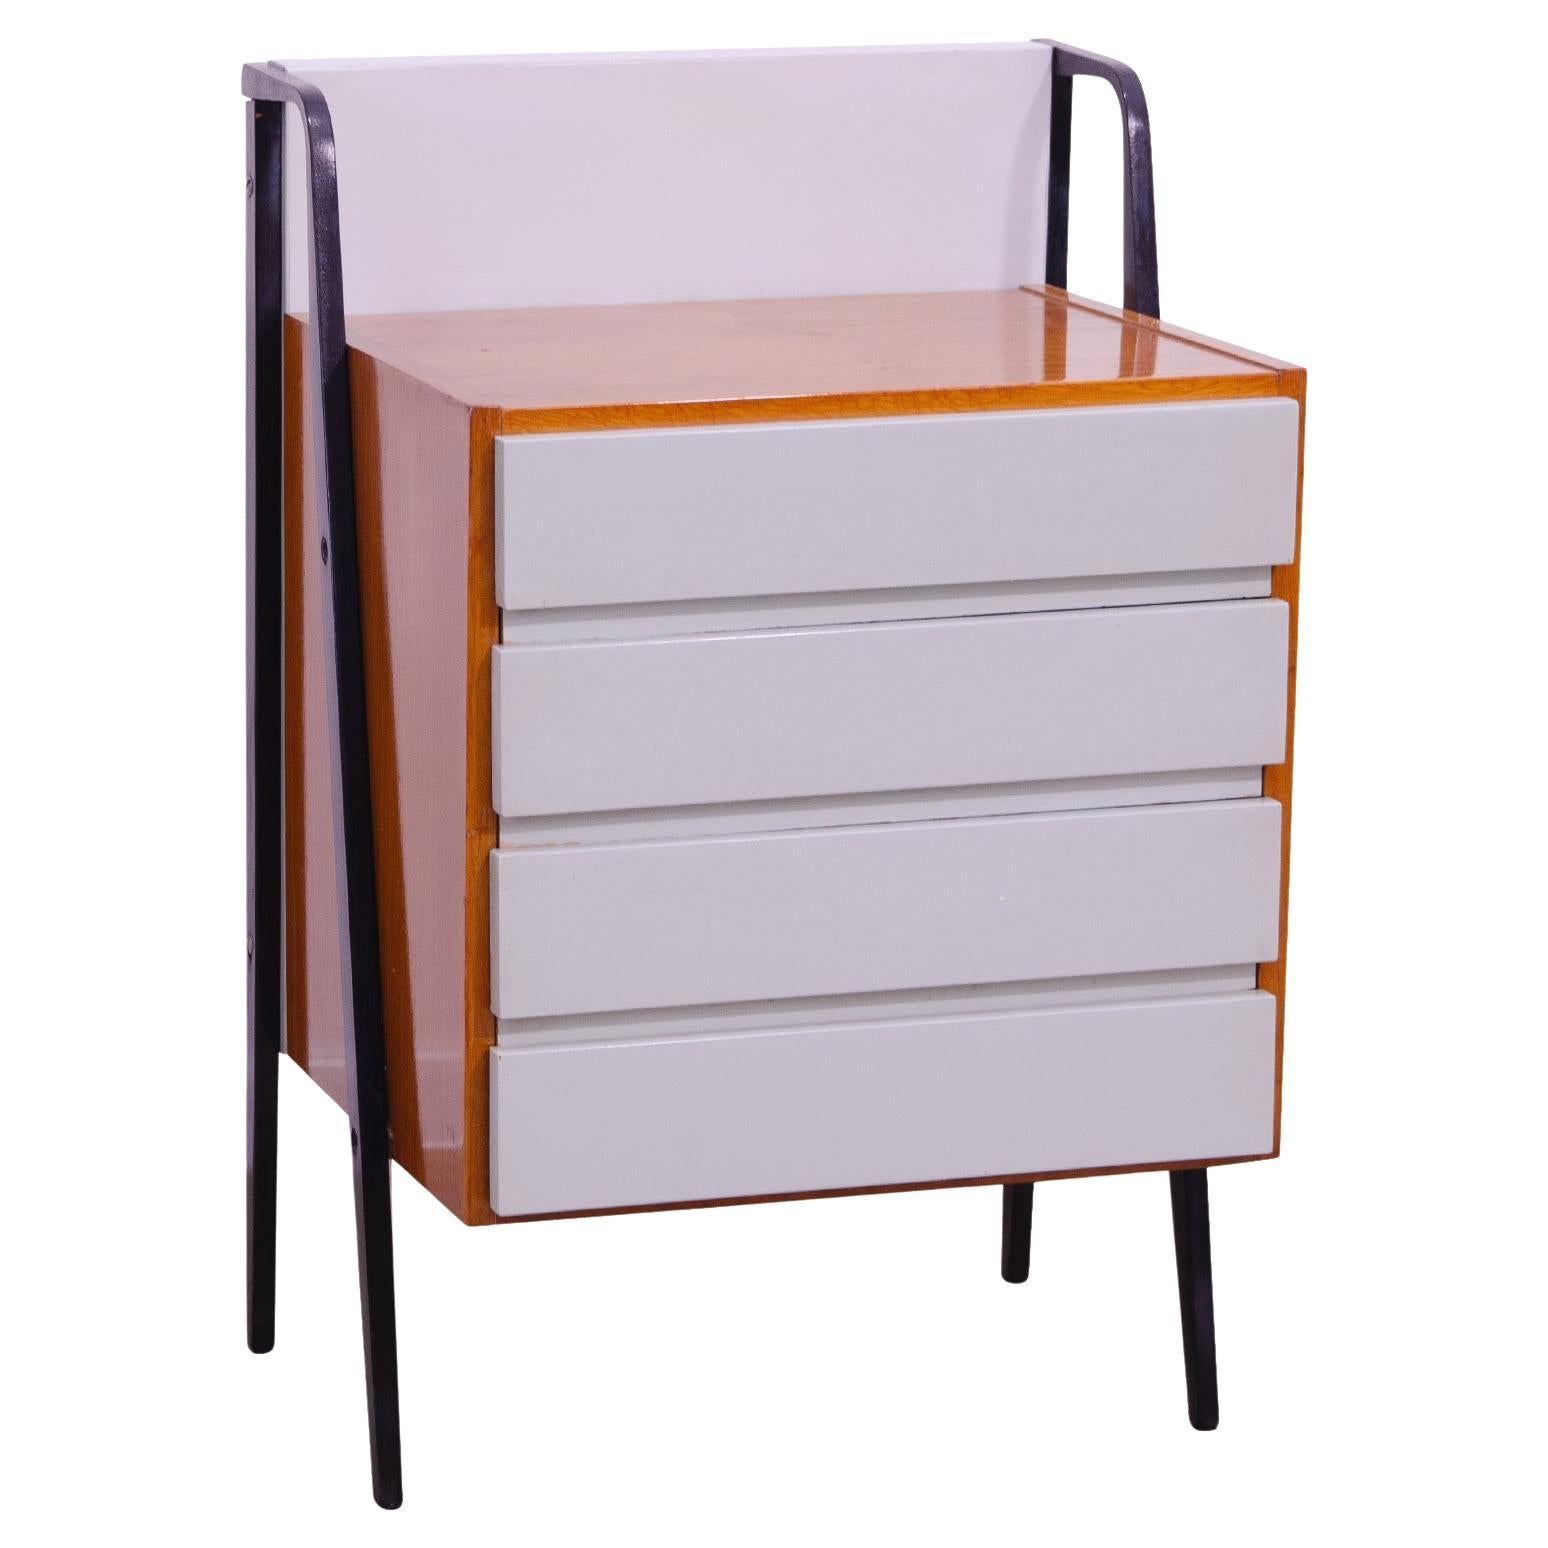 Tatra Pravenec Commodes and Chests of Drawers